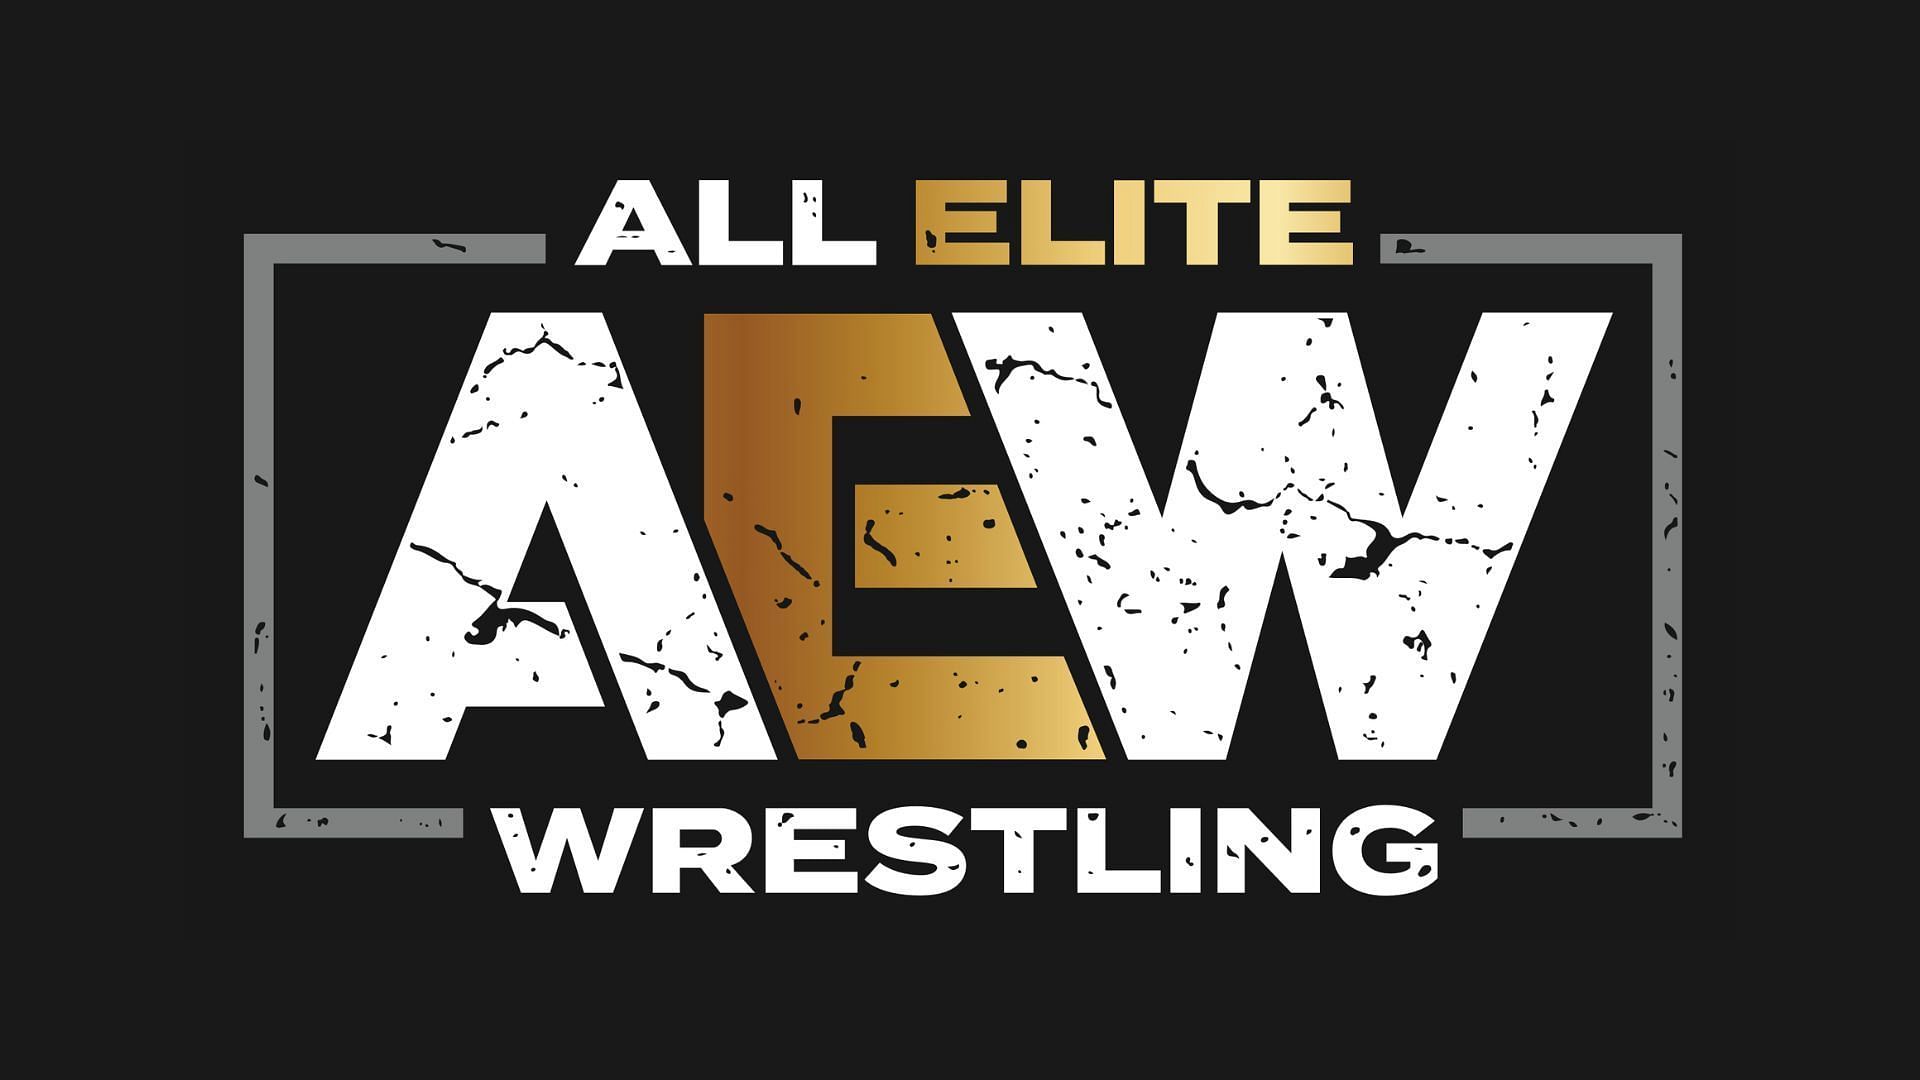 35-year-old star says he has &quot;been very depressed&quot; due to absence from AEW